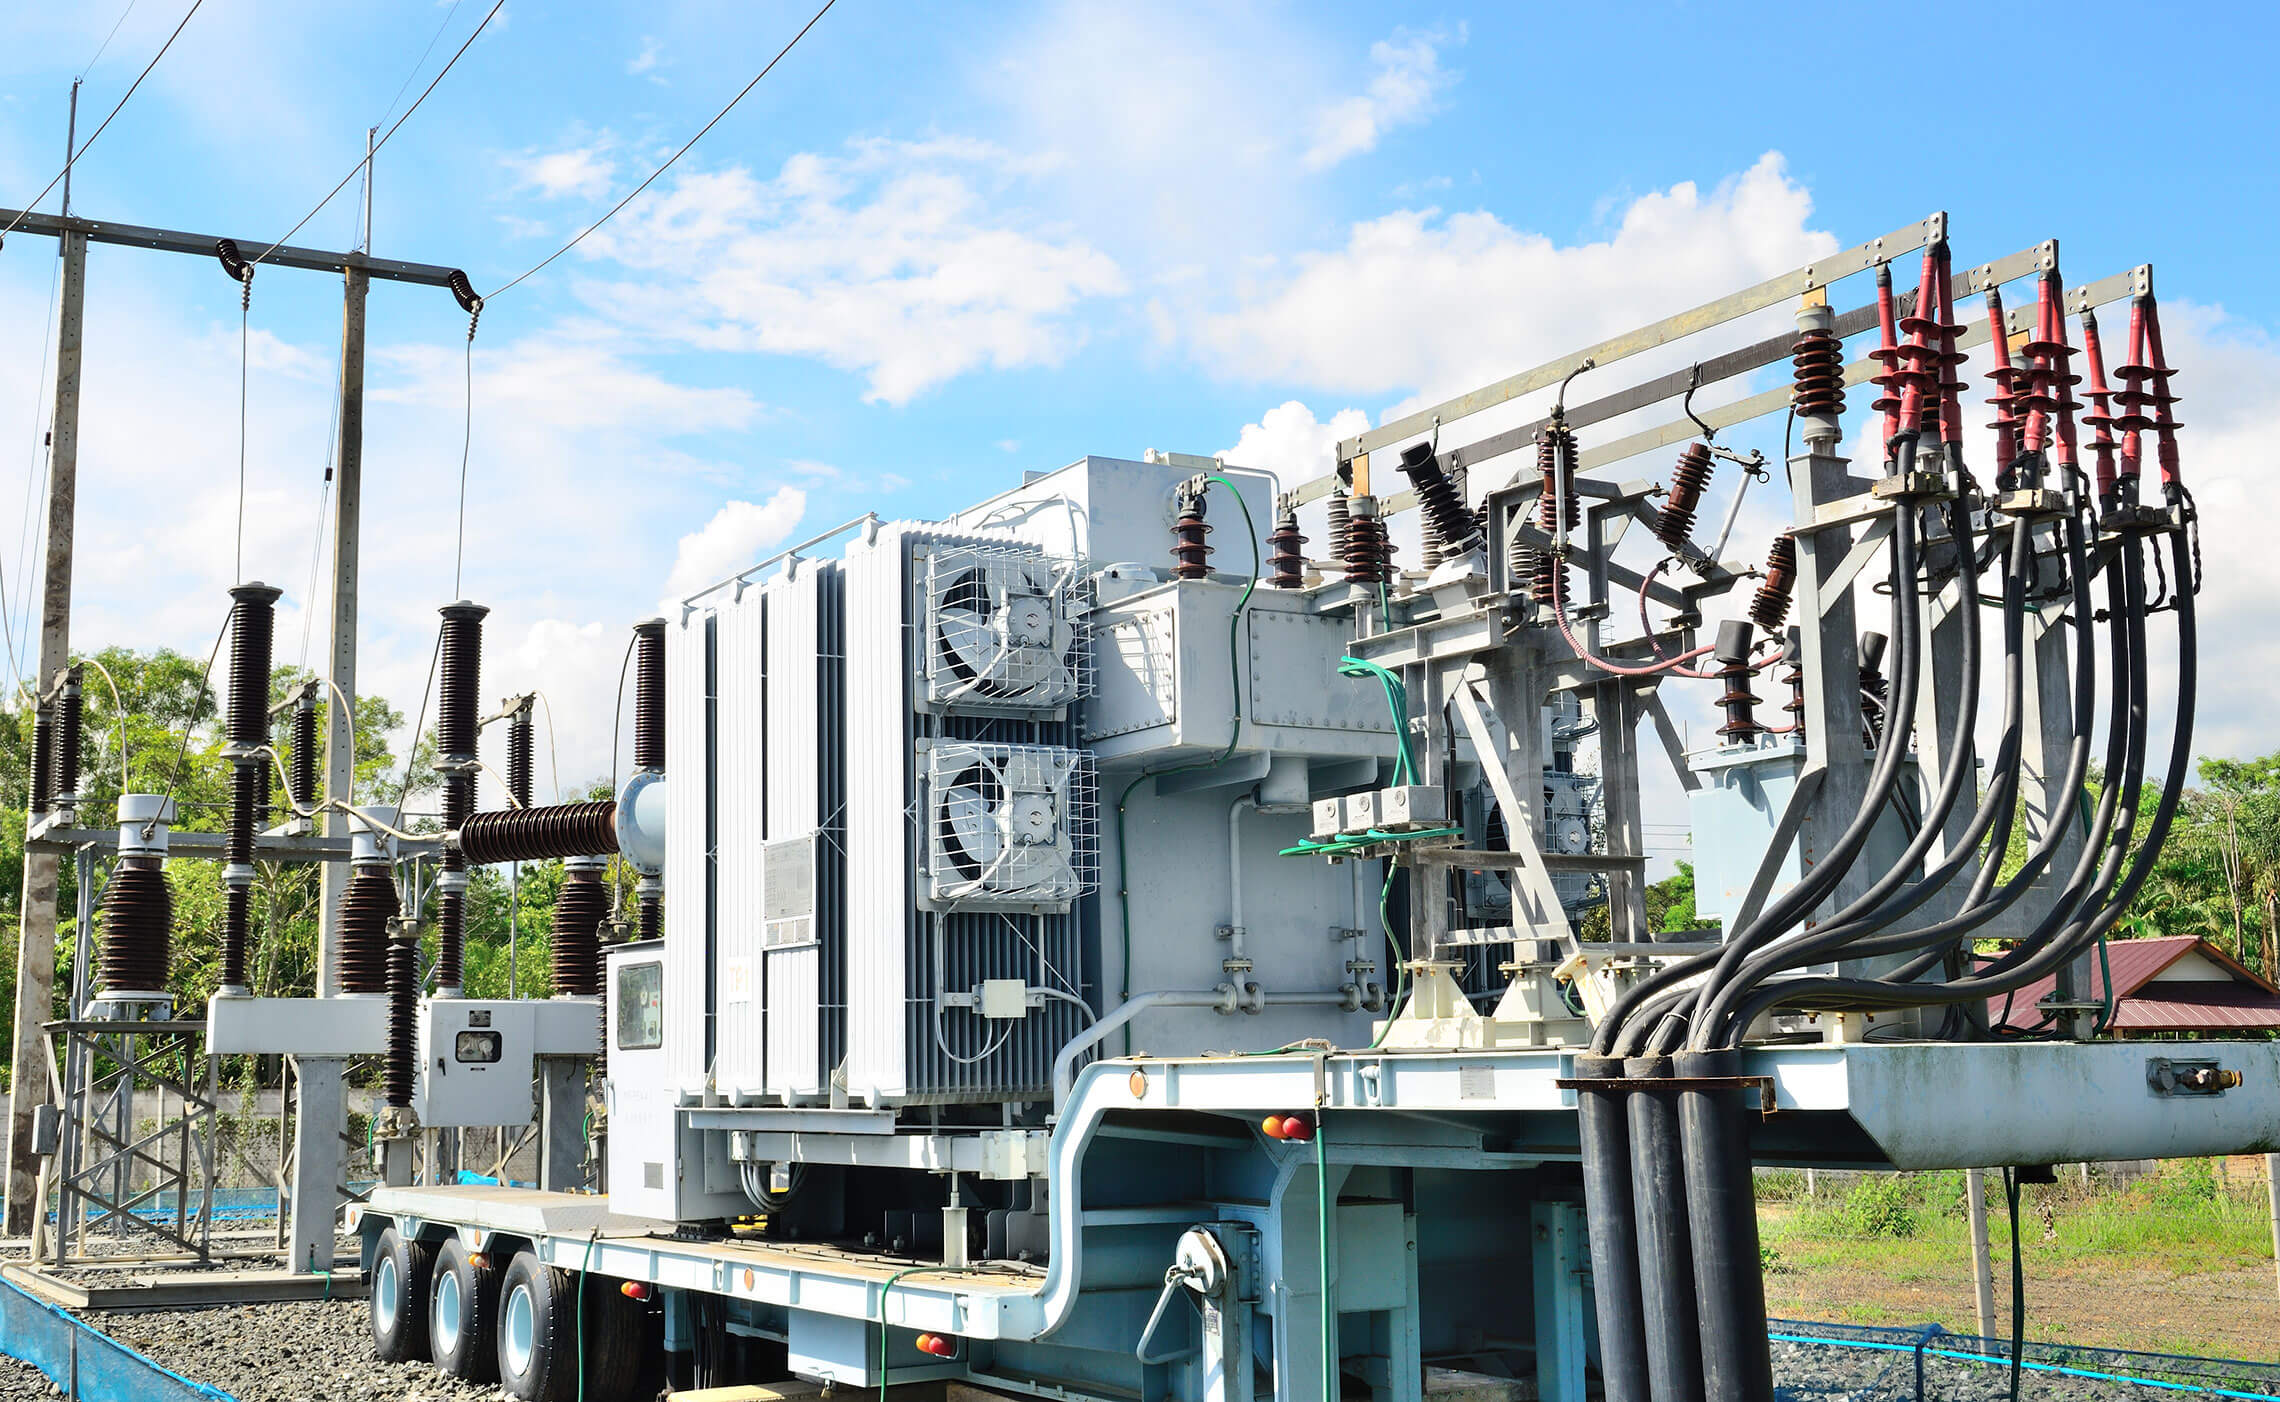 Power Transformers Explained - Electricity